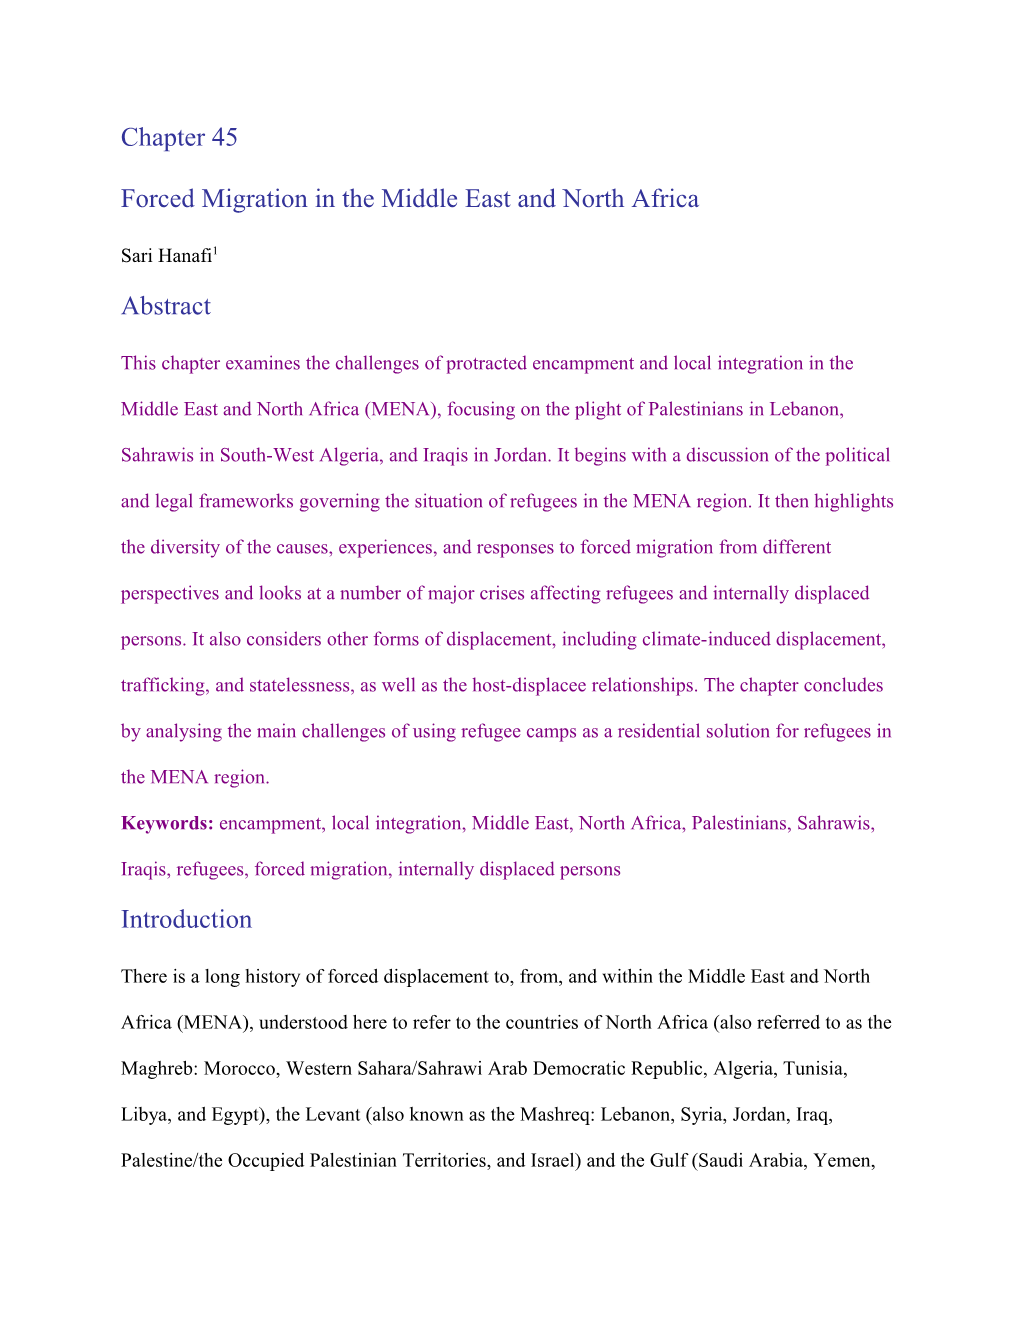 Forced Migration in the Middle East and North Africa